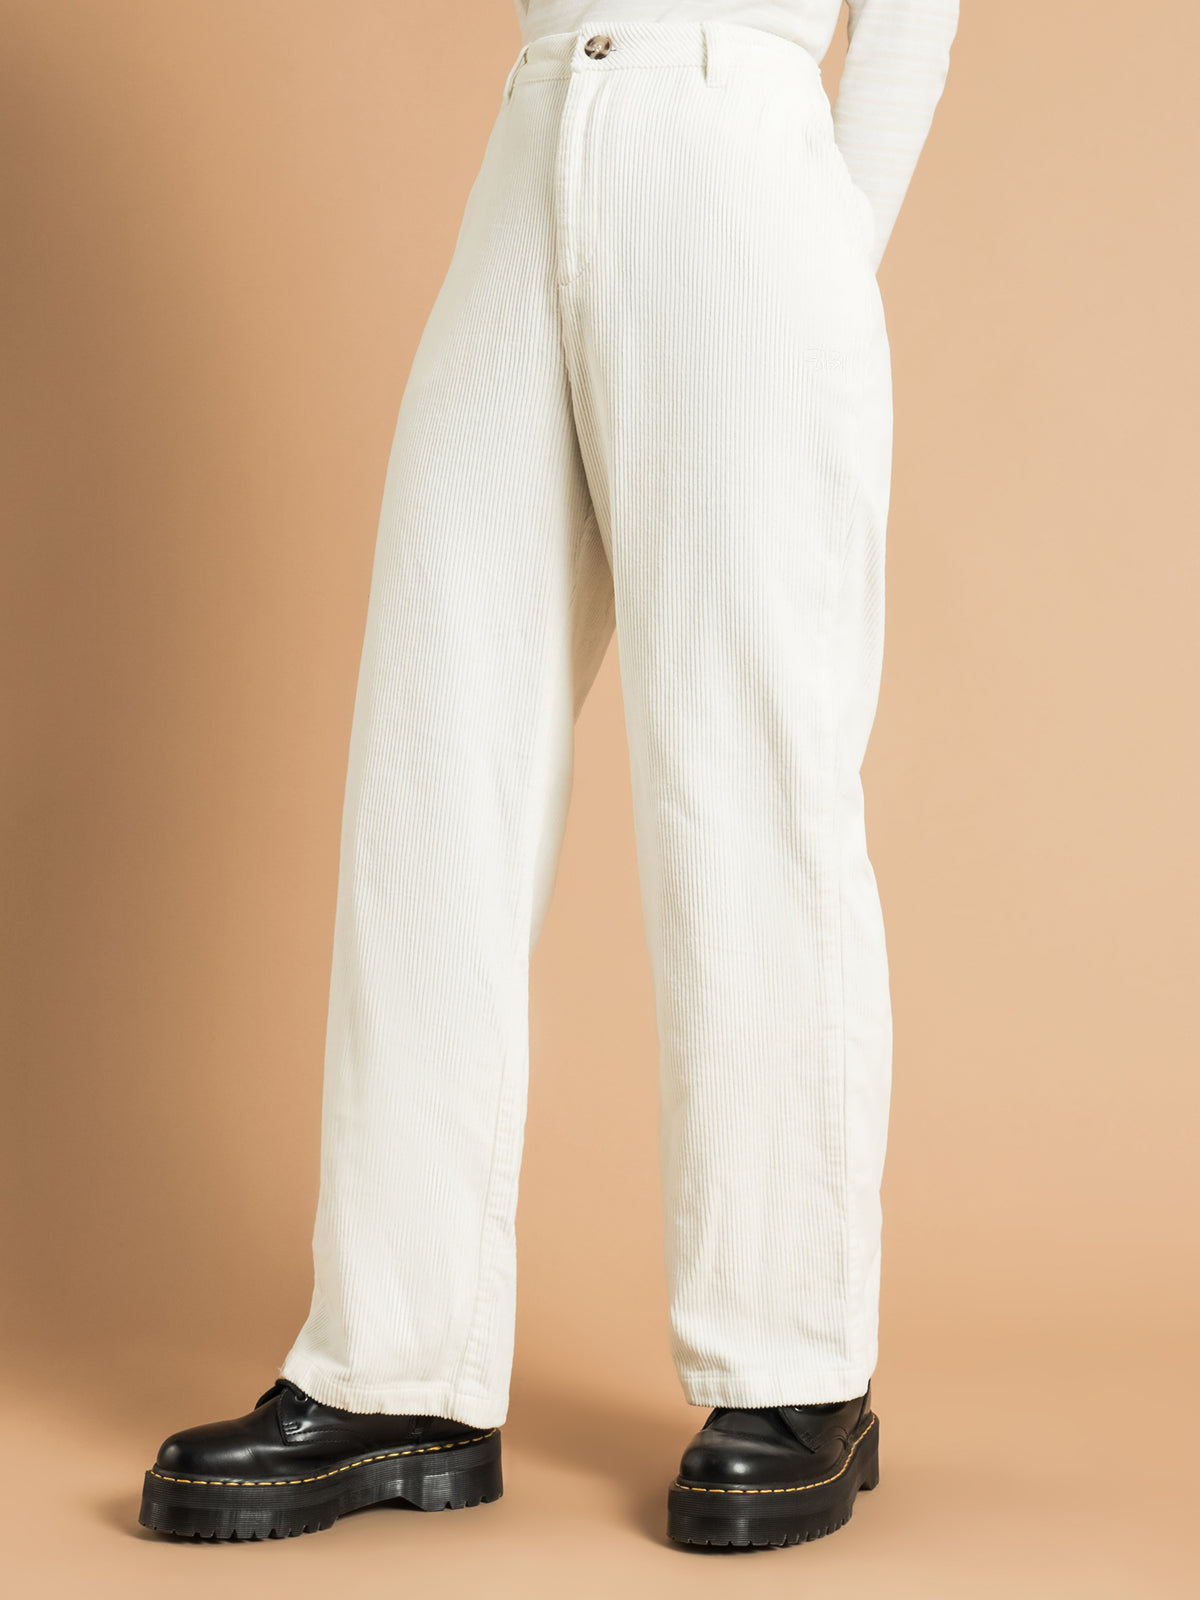 Claudette Cord Pants in White